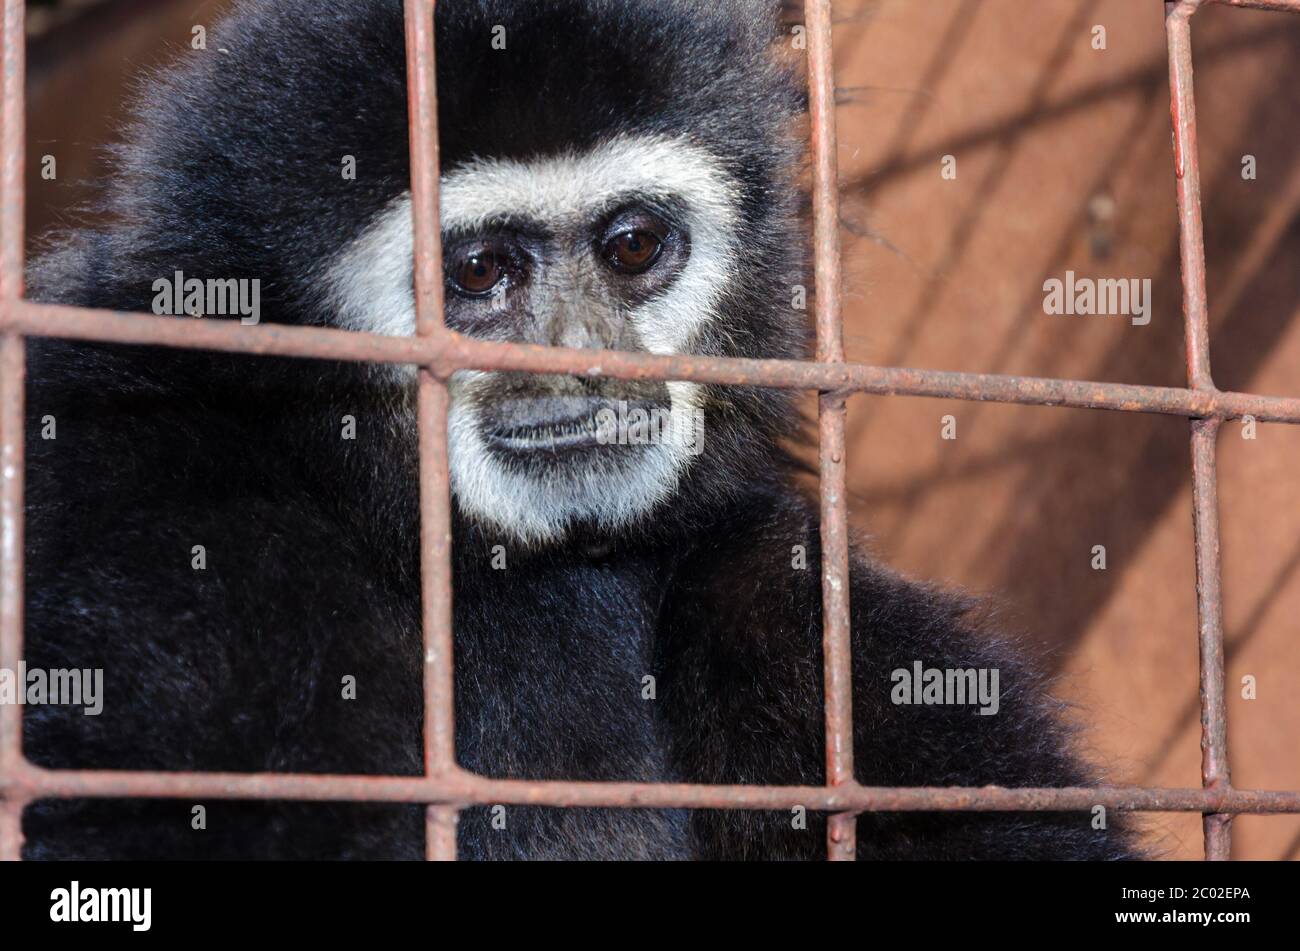 Face and eyes downcast of gibbon in a cage Stock Photo